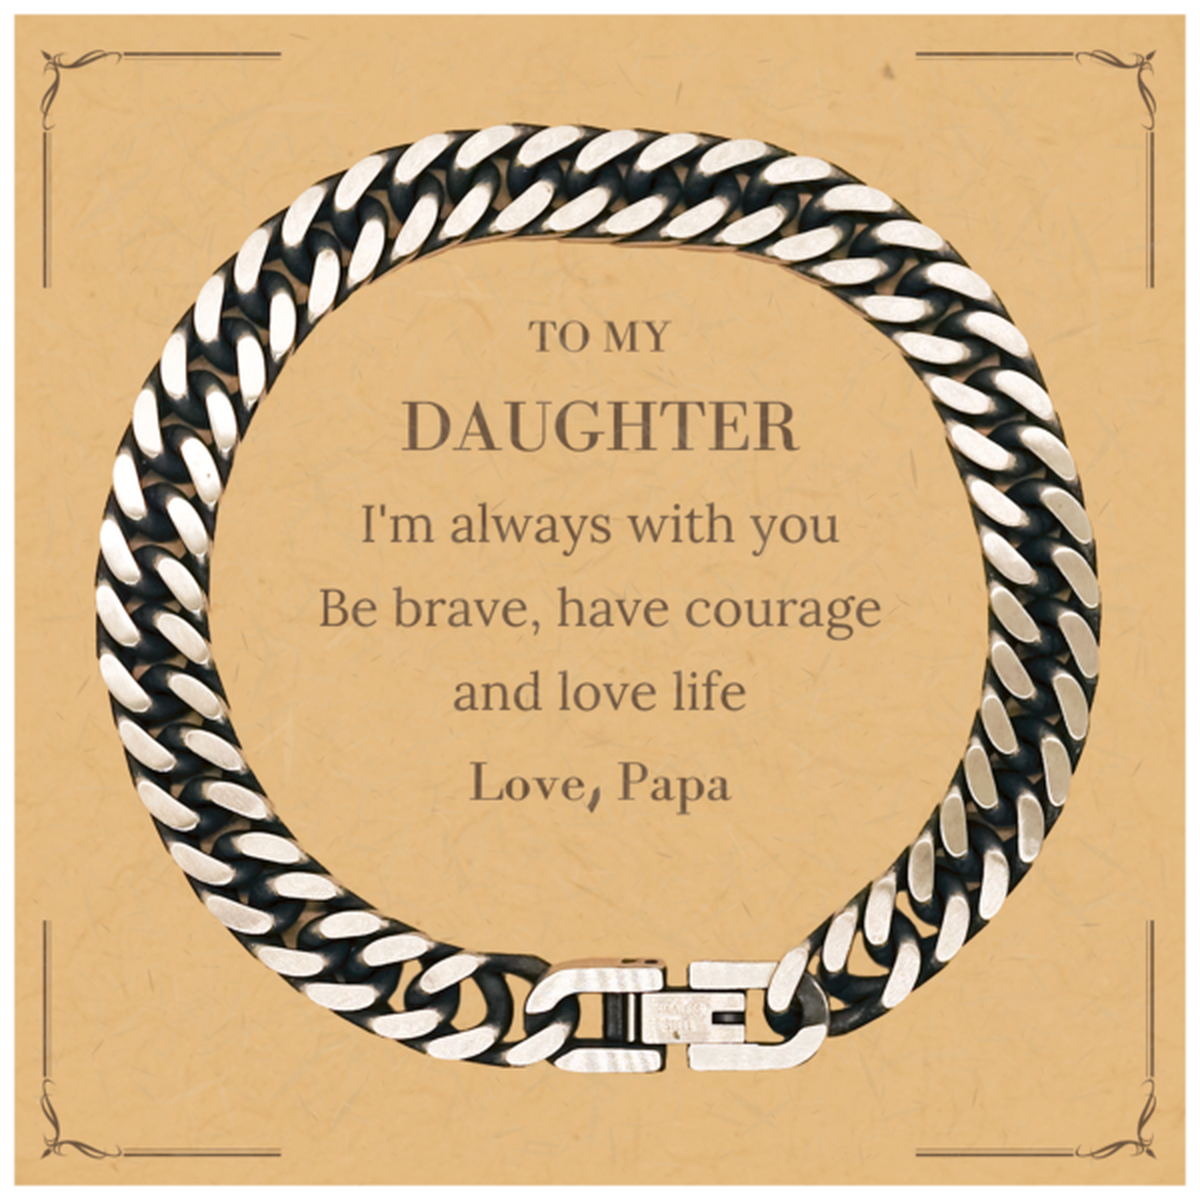 To My Daughter Gifts from Papa, Unique Cuban Link Chain Bracelet Inspirational Christmas Birthday Graduation Gifts for Daughter I'm always with you. Be brave, have courage and love life. Love, Papa